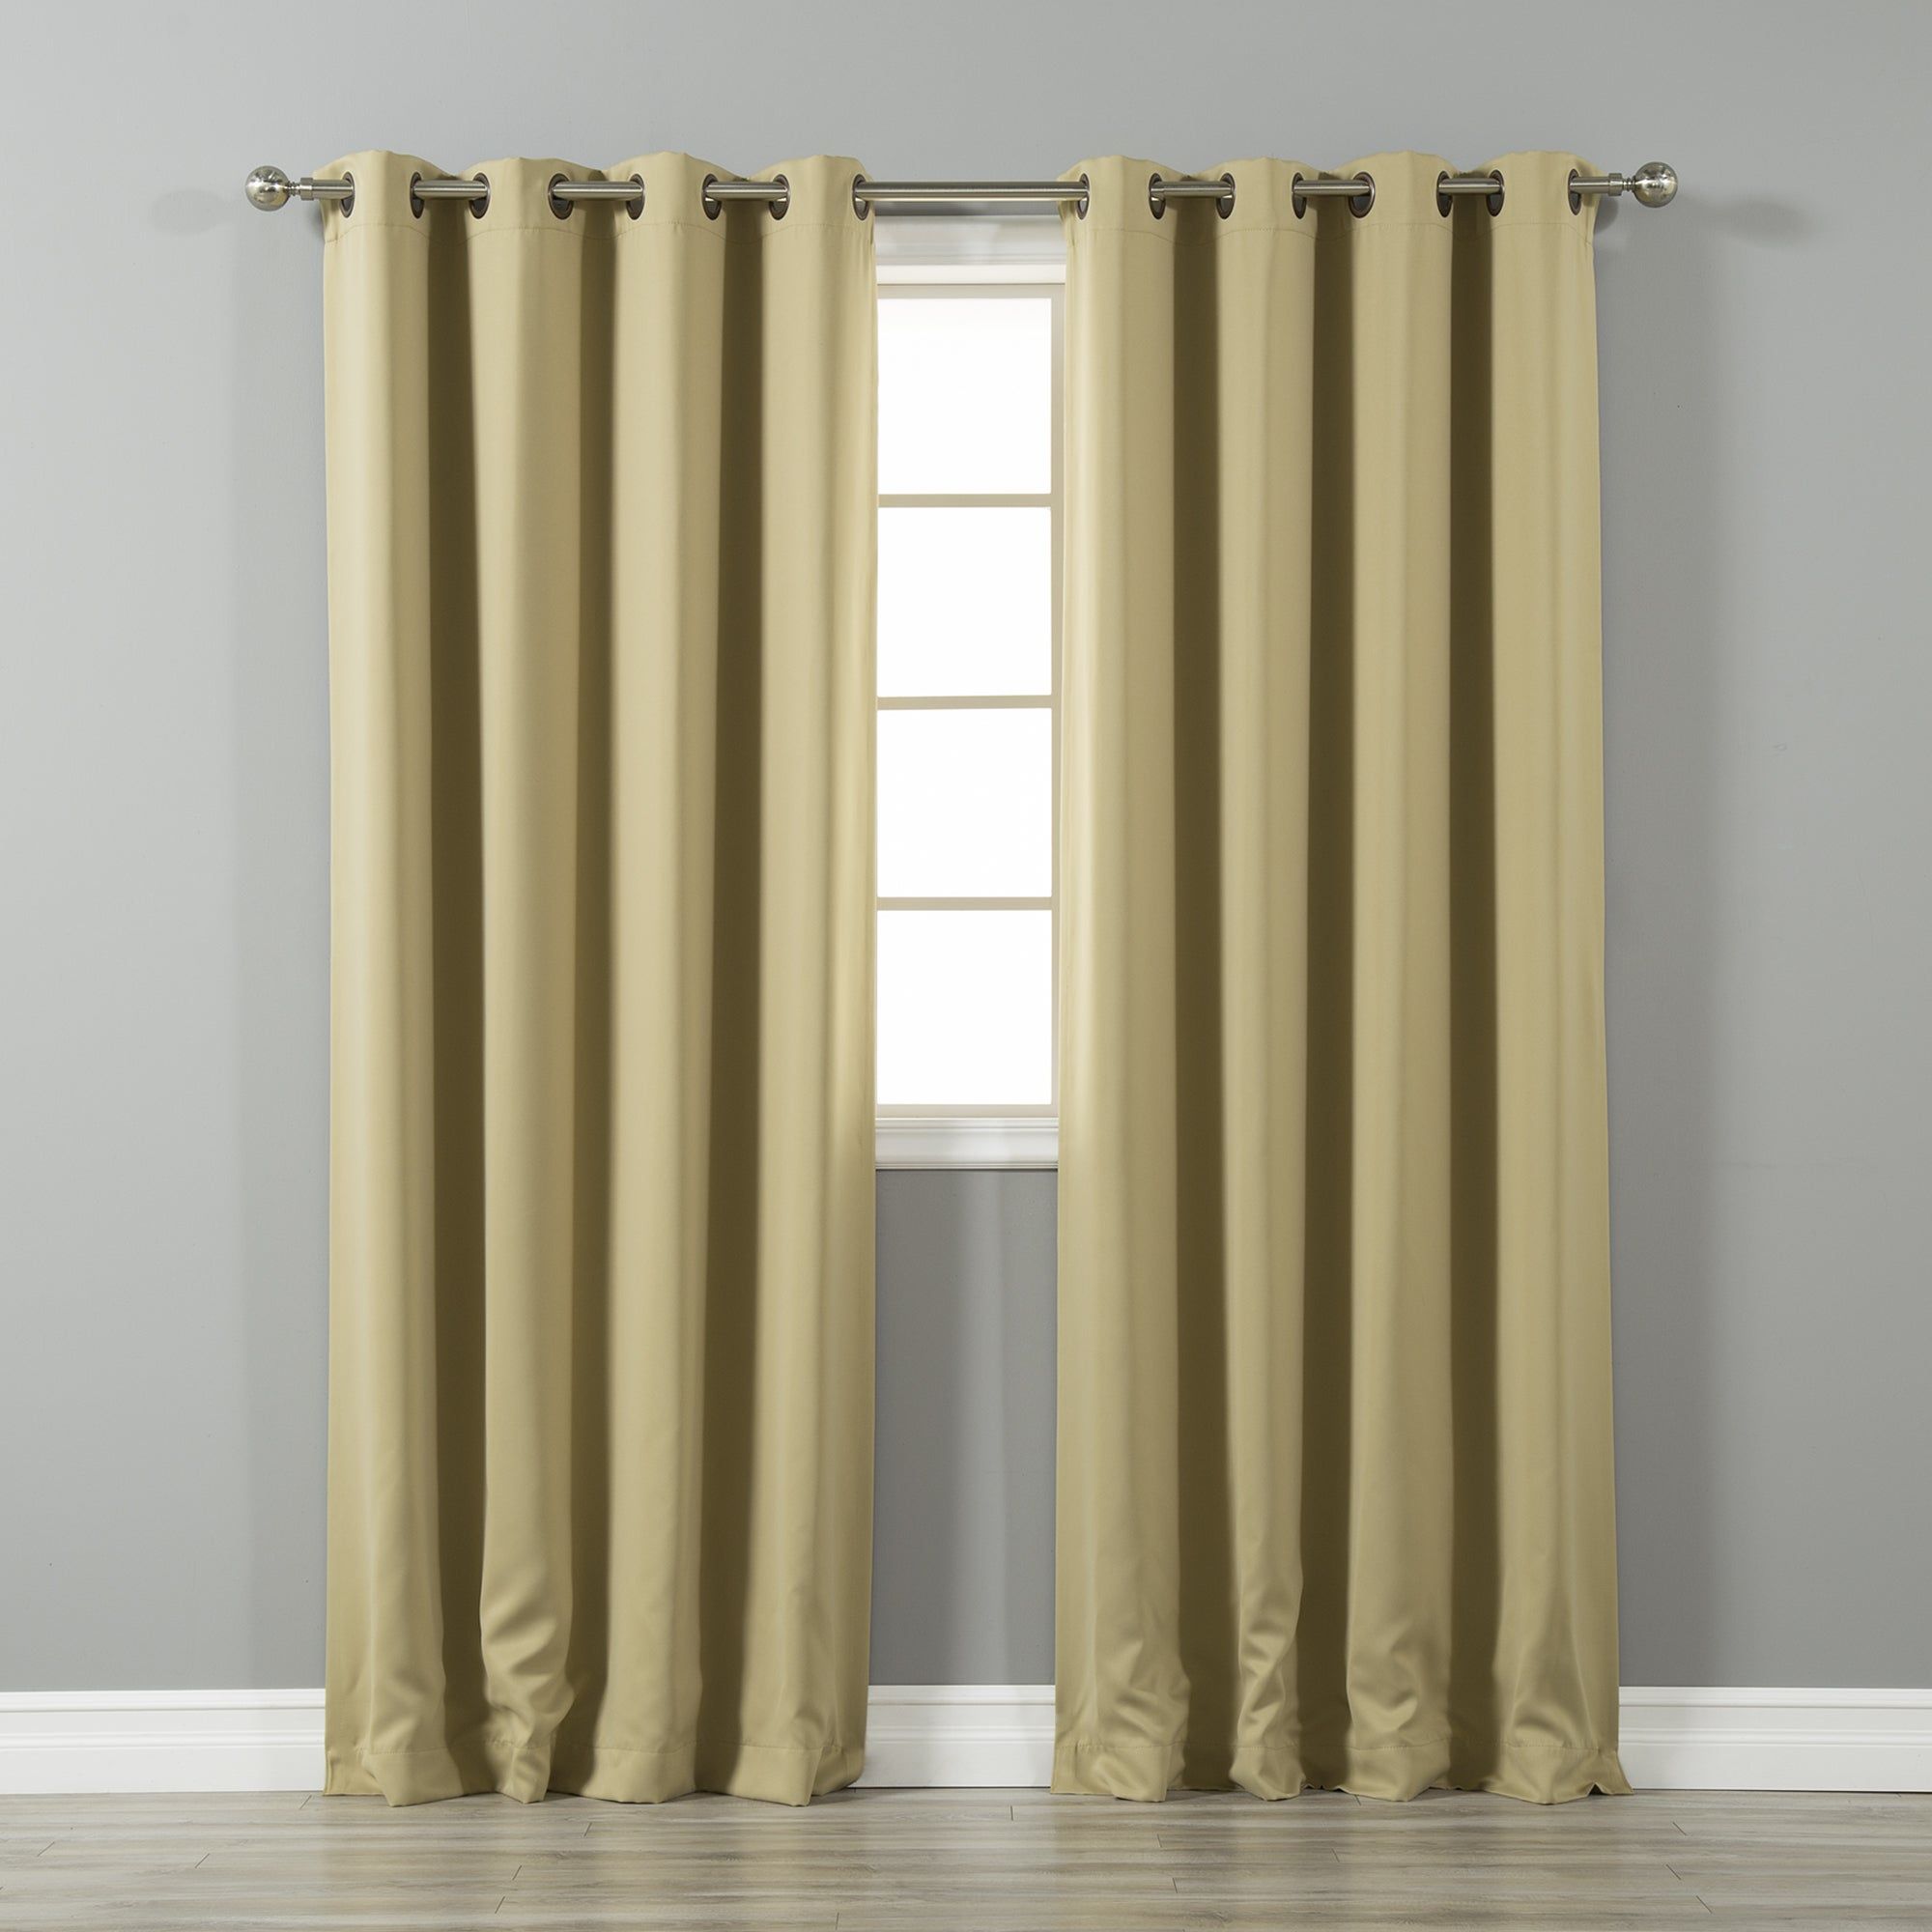 Aurora Home Thermal Insulated Blackout Grommet Top 84 Inch Curtain Panel  Pair – 52 X 84 Throughout Thermal Insulated Blackout Grommet Top Curtain Panel Pairs (View 10 of 30)